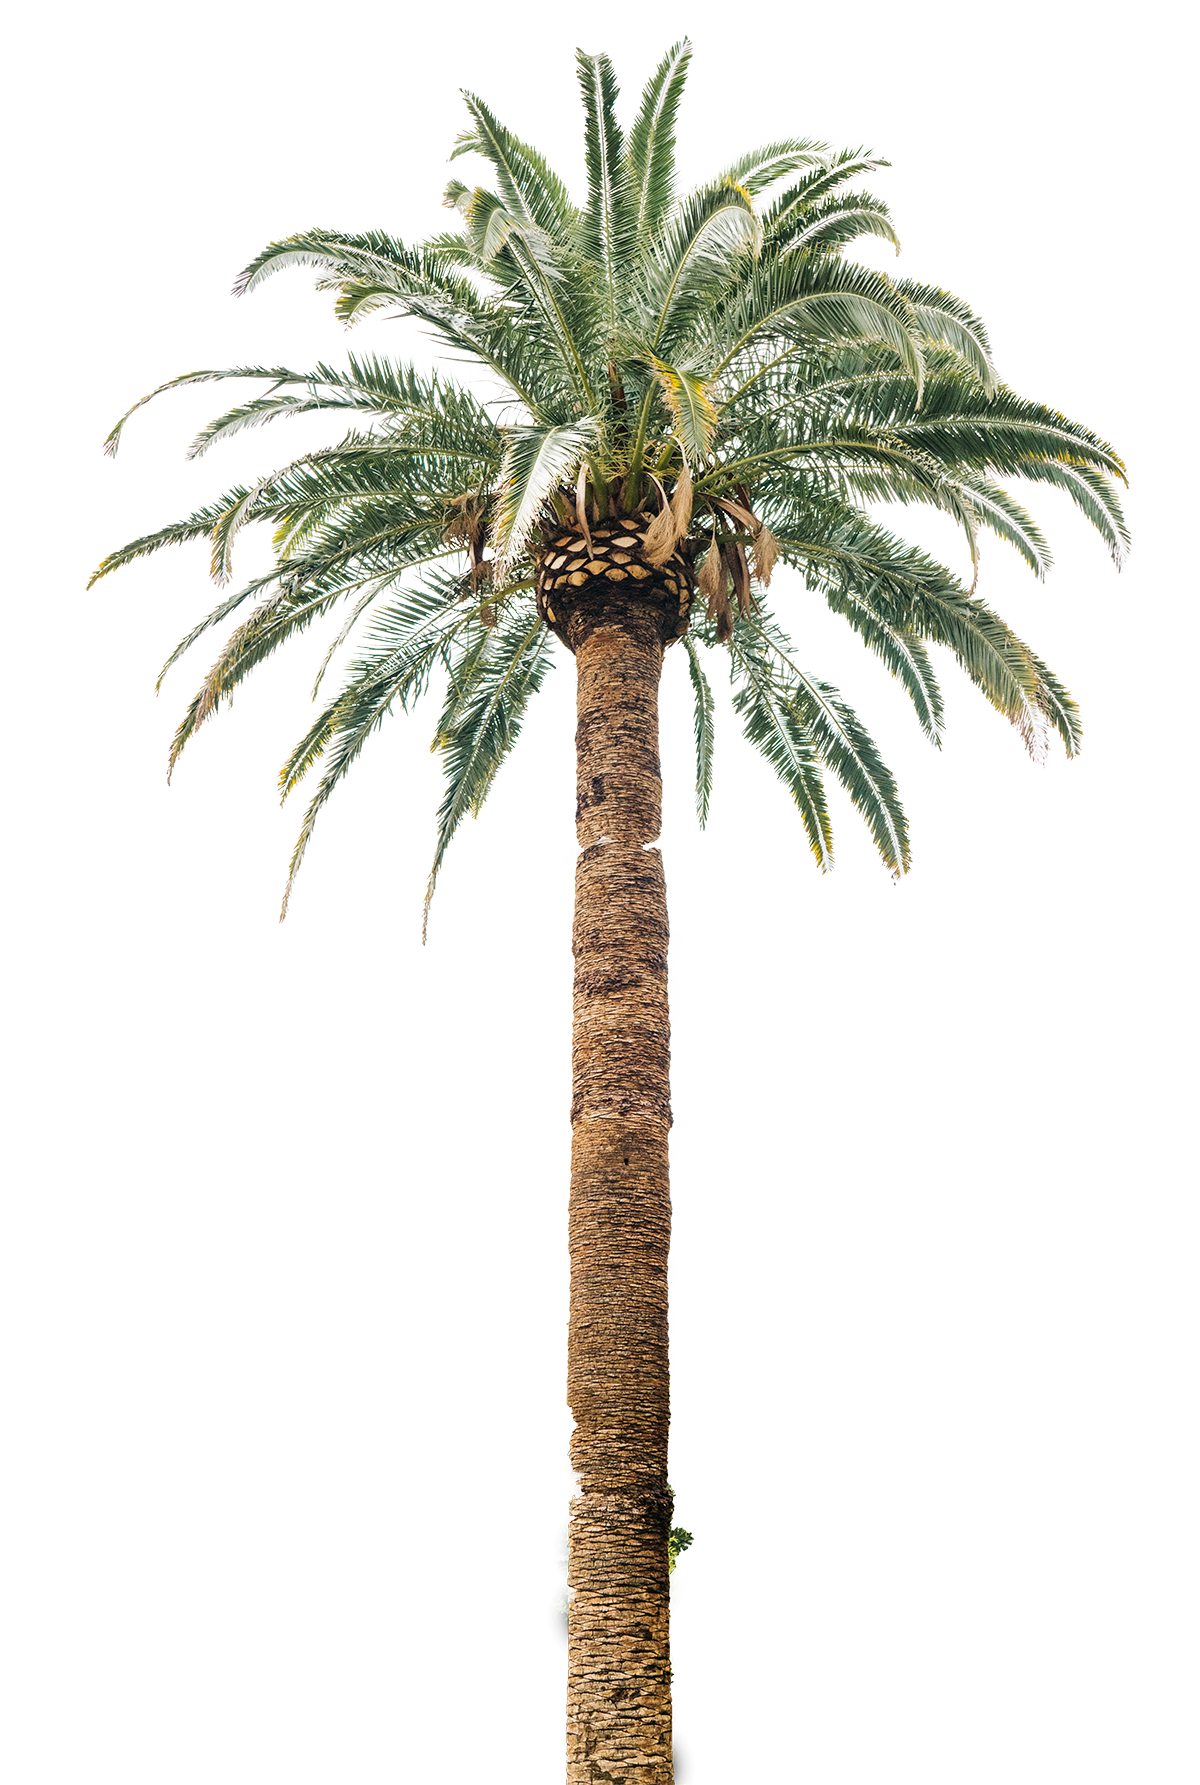 palm tree png